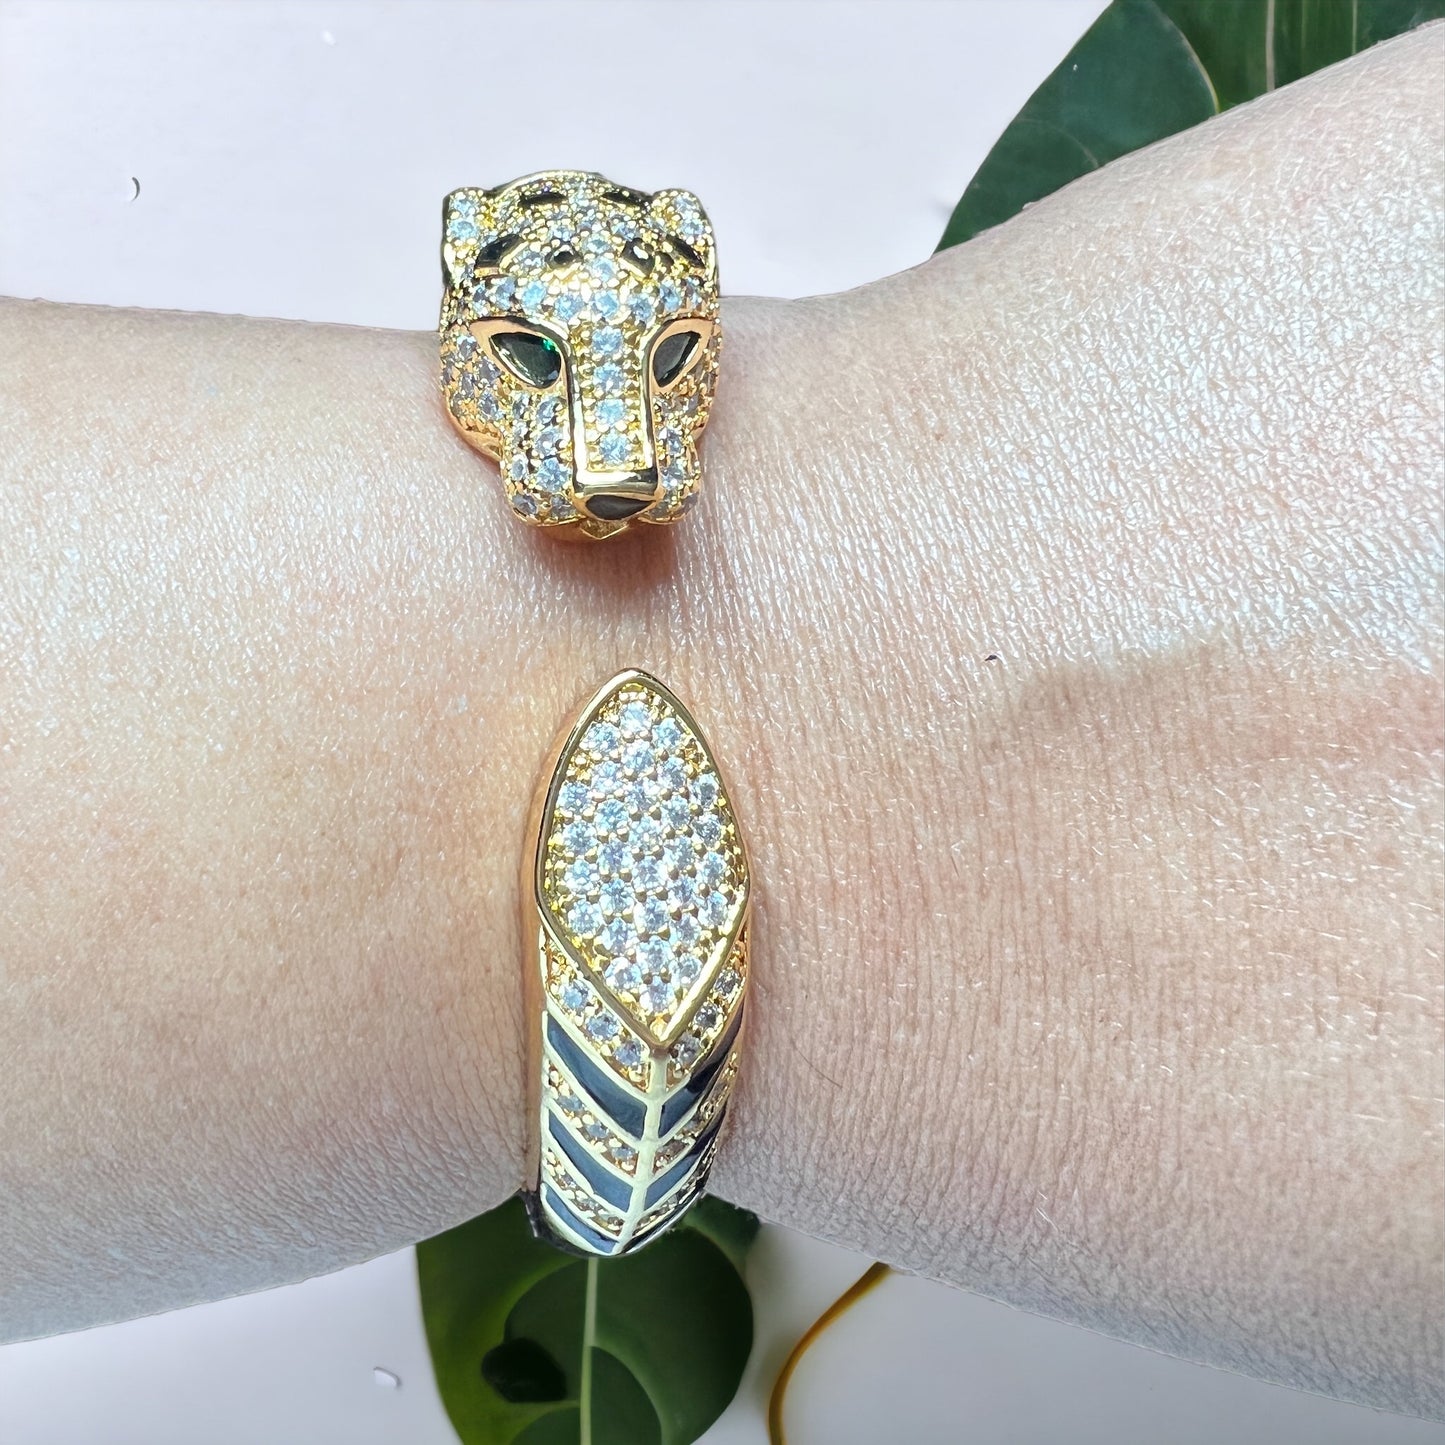 Luxury Unleashed: 22k Gold-Plated Green Eyes Panther Openable Bracelet